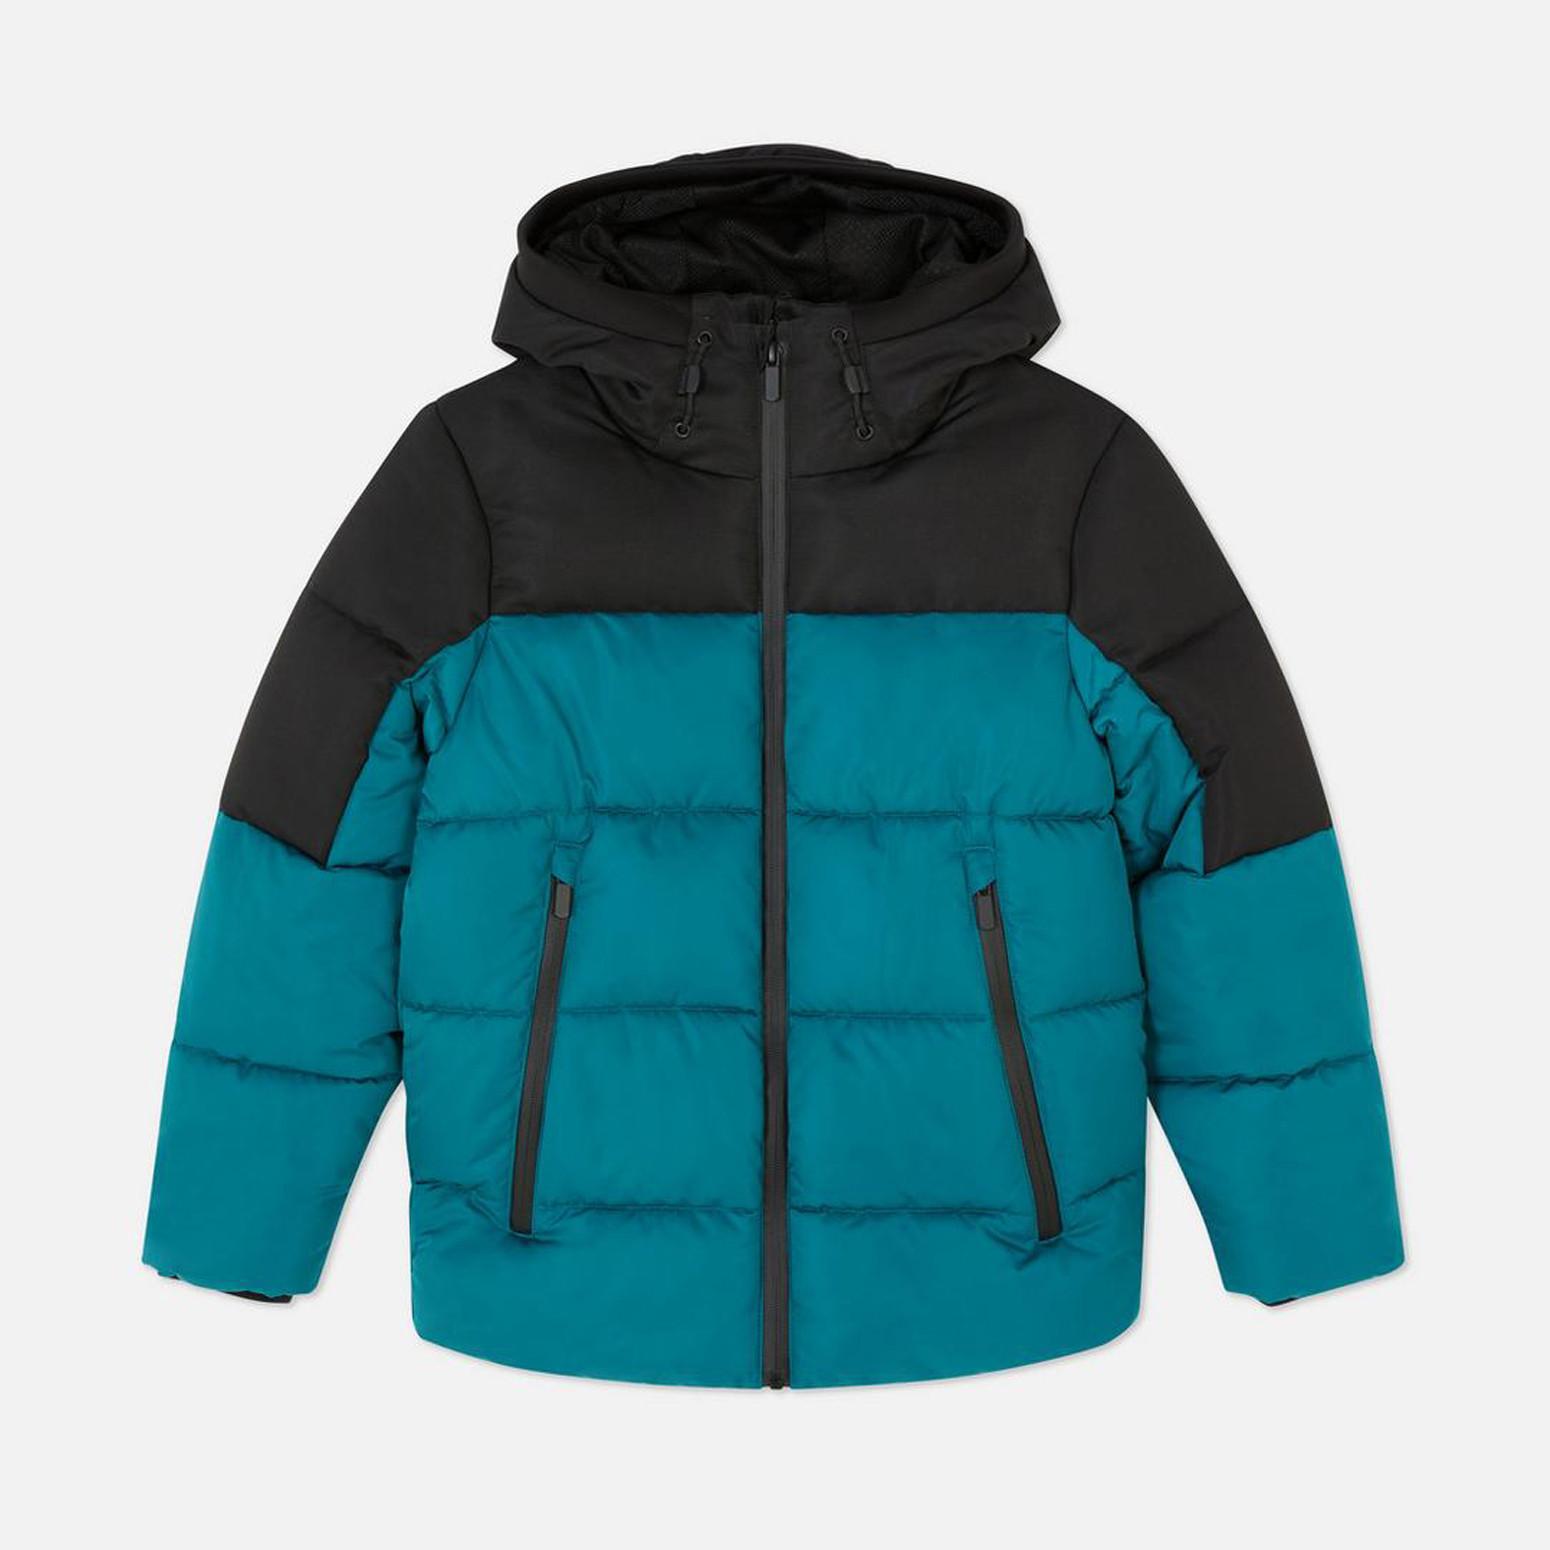 Kids teal puffer jacket with hood